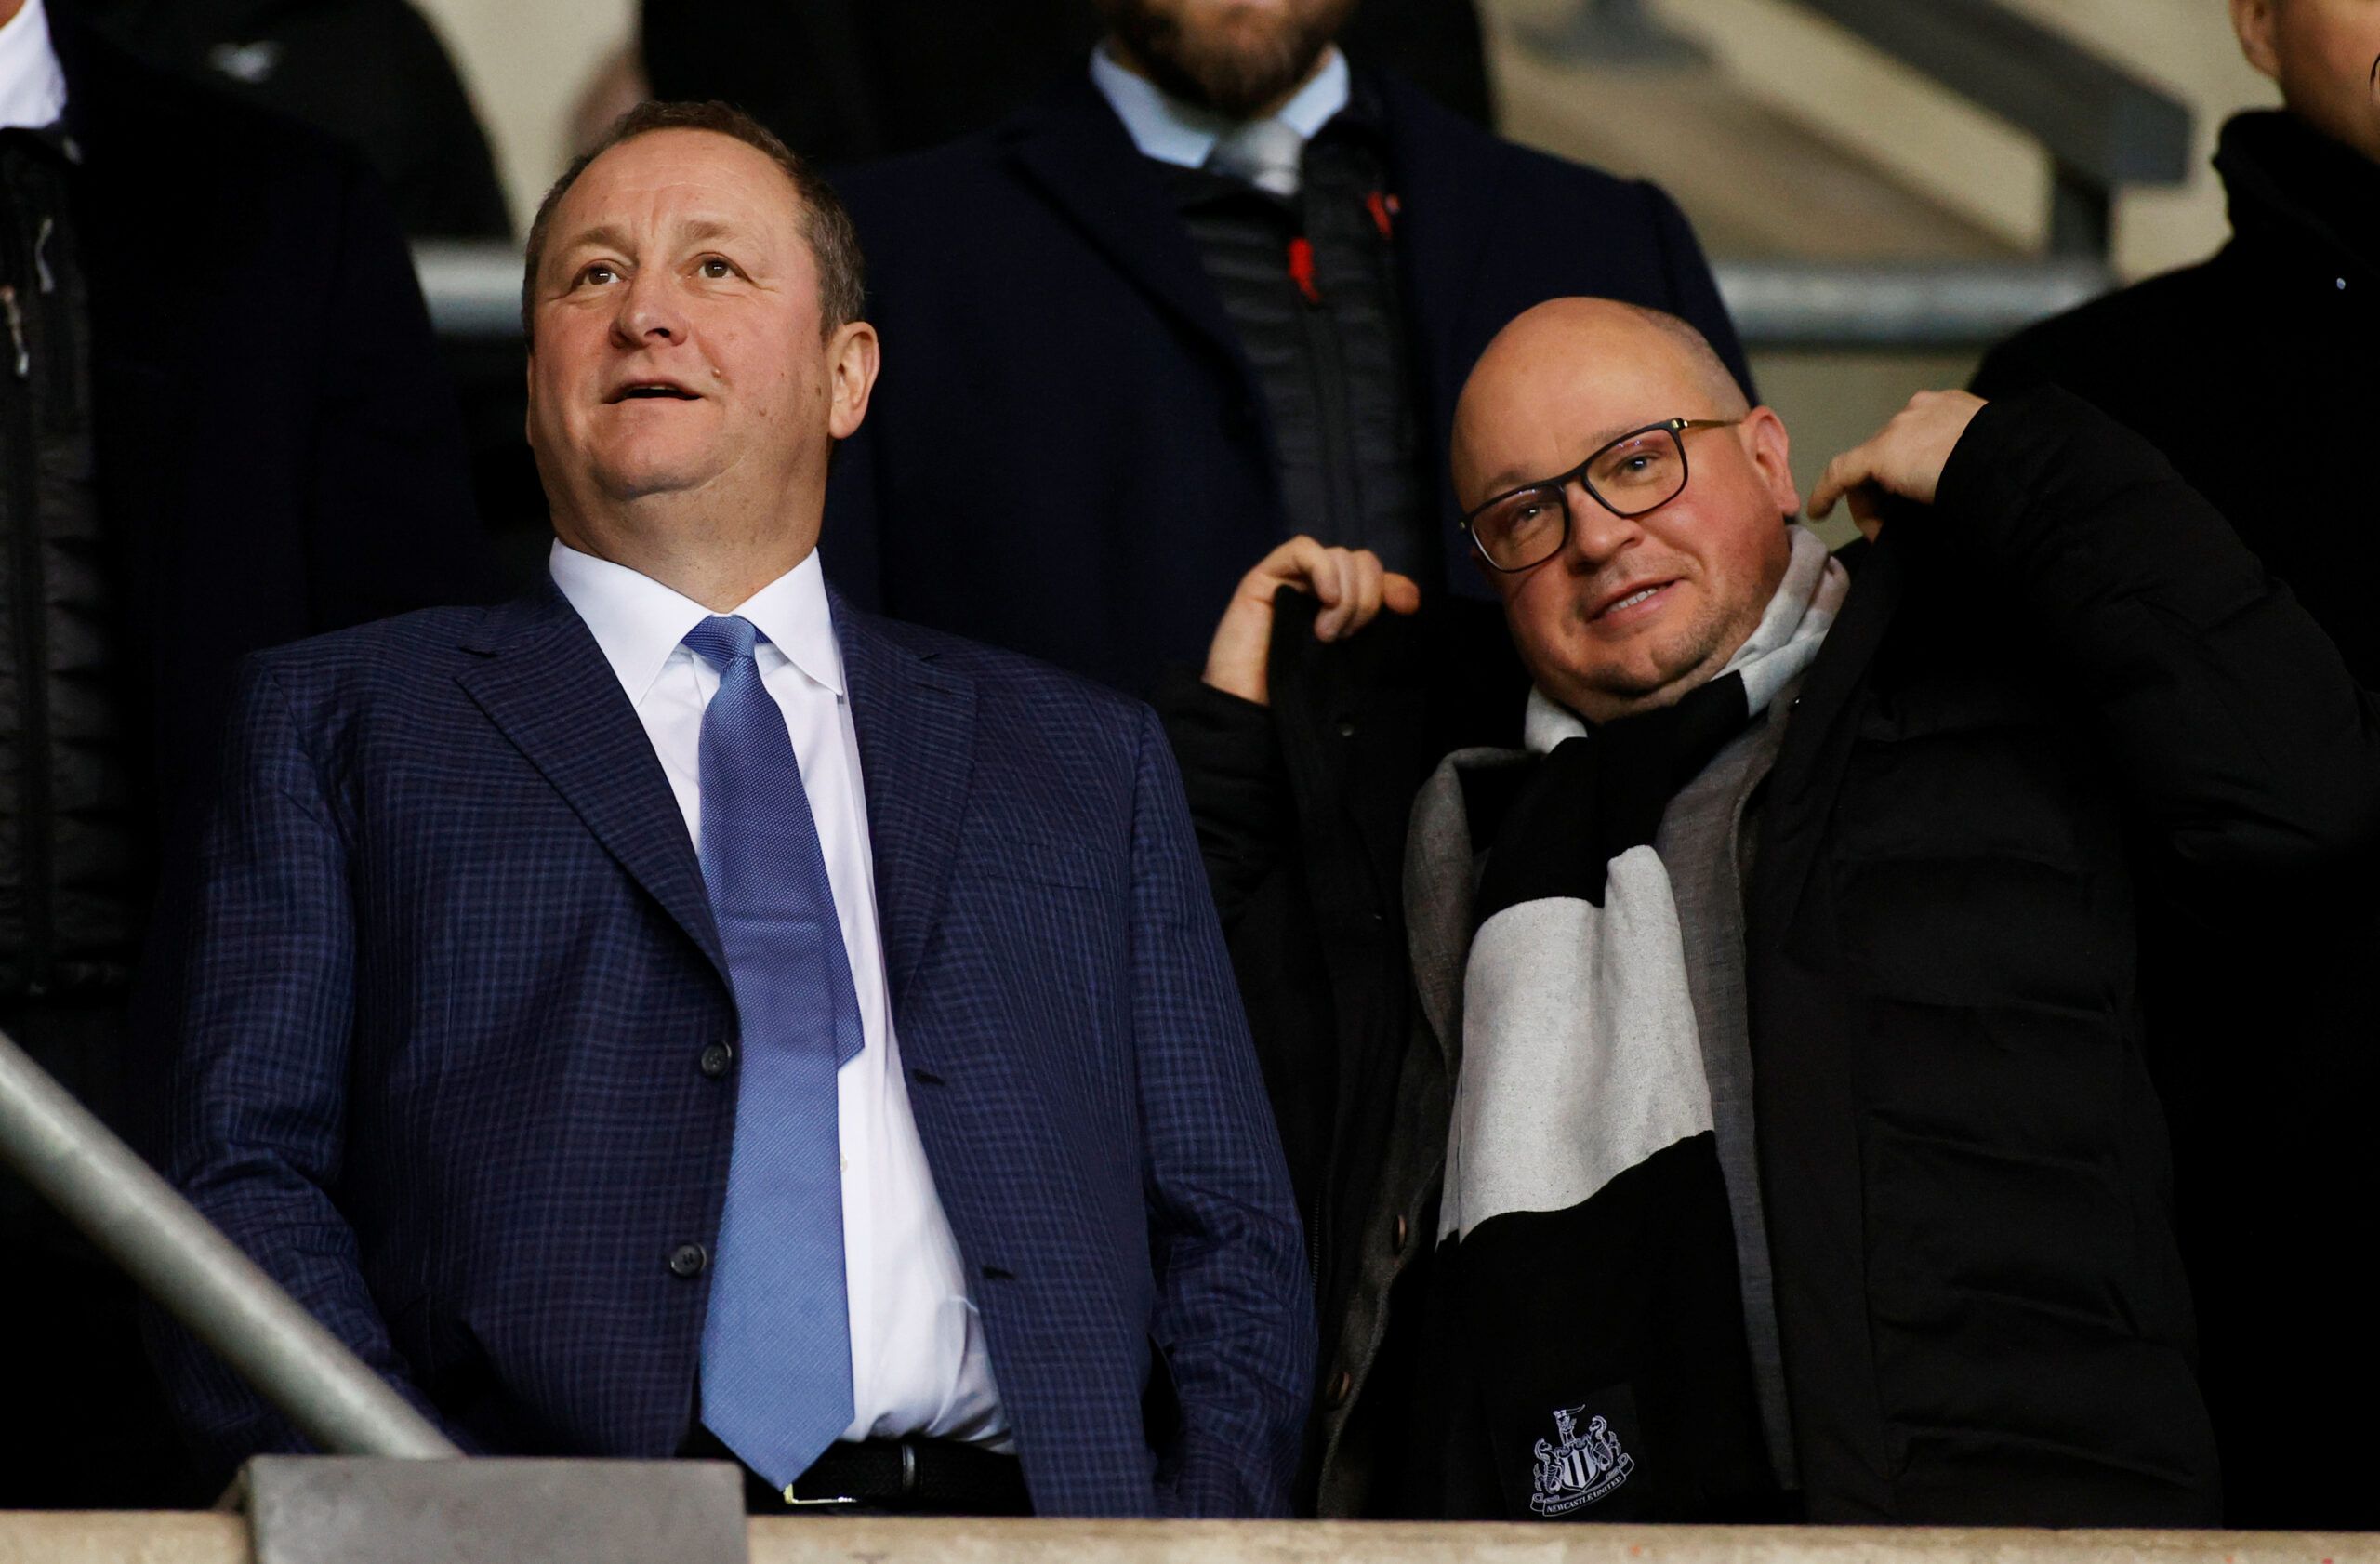 Soccer Football -  FA Cup Fourth Round Replay - Oxford United v Newcastle United  - Kassam Stadium, Oxford, Britain - February 4, 2020  Newcastle United owner Mike Ashley and managing director Lee Charnley in the stands before the match    Action Images via Reuters/John Sibley